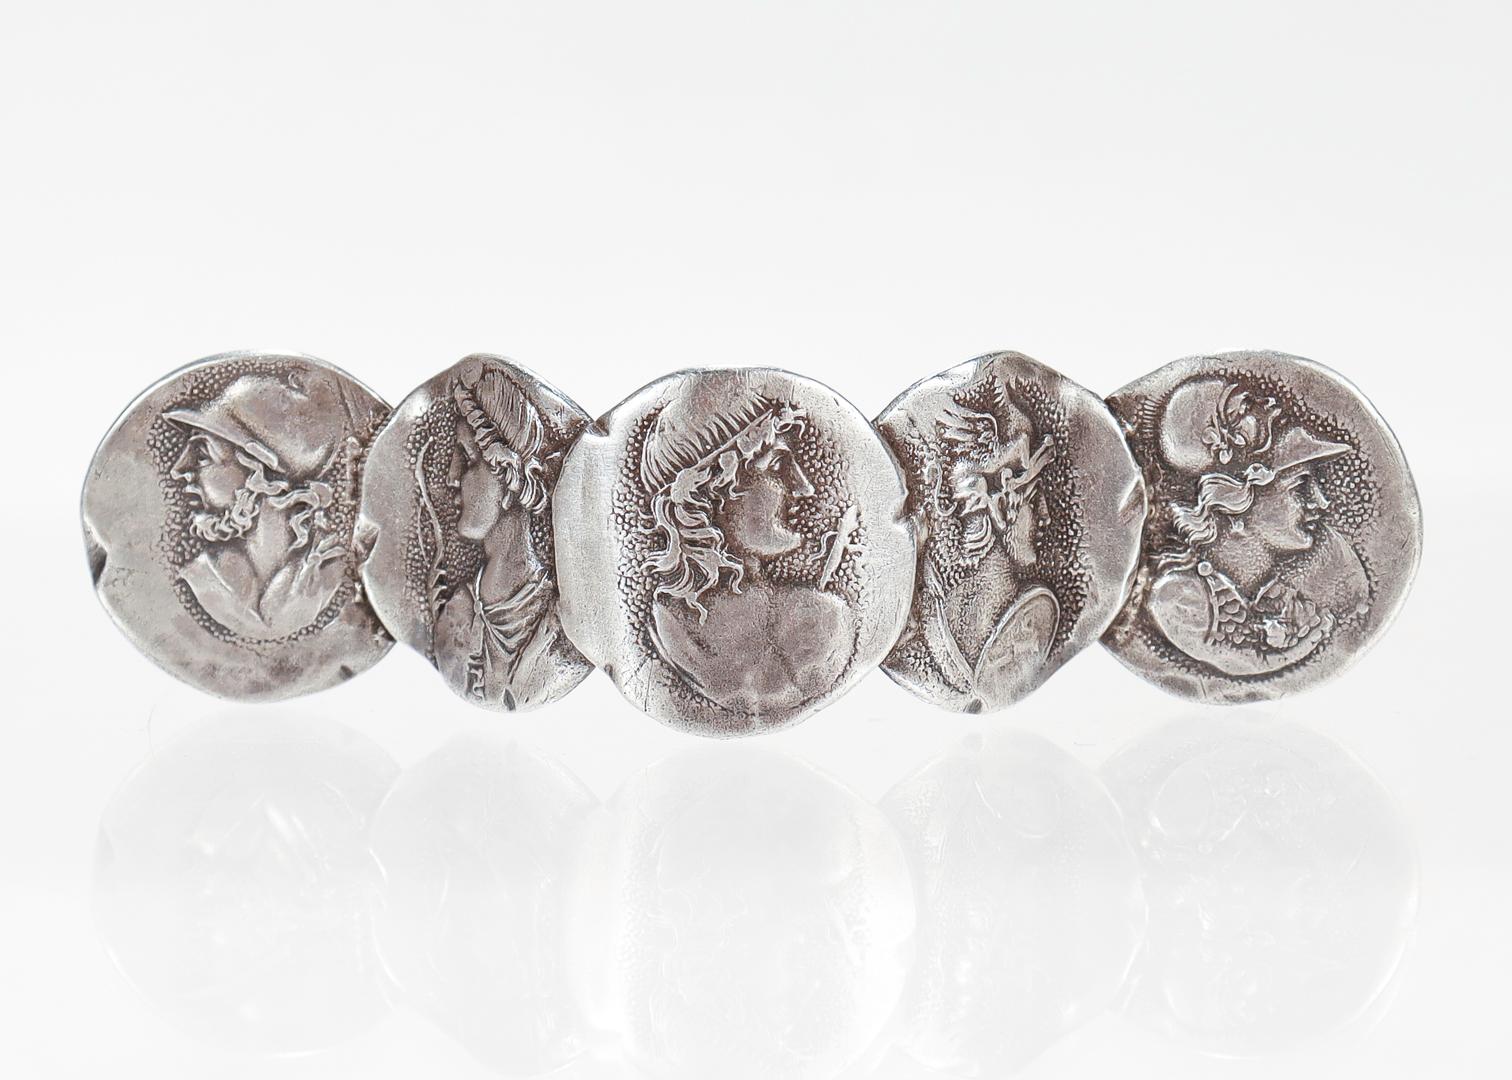 A fine antique Shiebler Etruscan medallion brooch.

In sterling silver.

Consisting of five connected Etruscan cameo medallions in the shape of an arc. 

Marked to the reverse with Shiebler's maker's mark / Sterling / 694.

Simply a wonderful